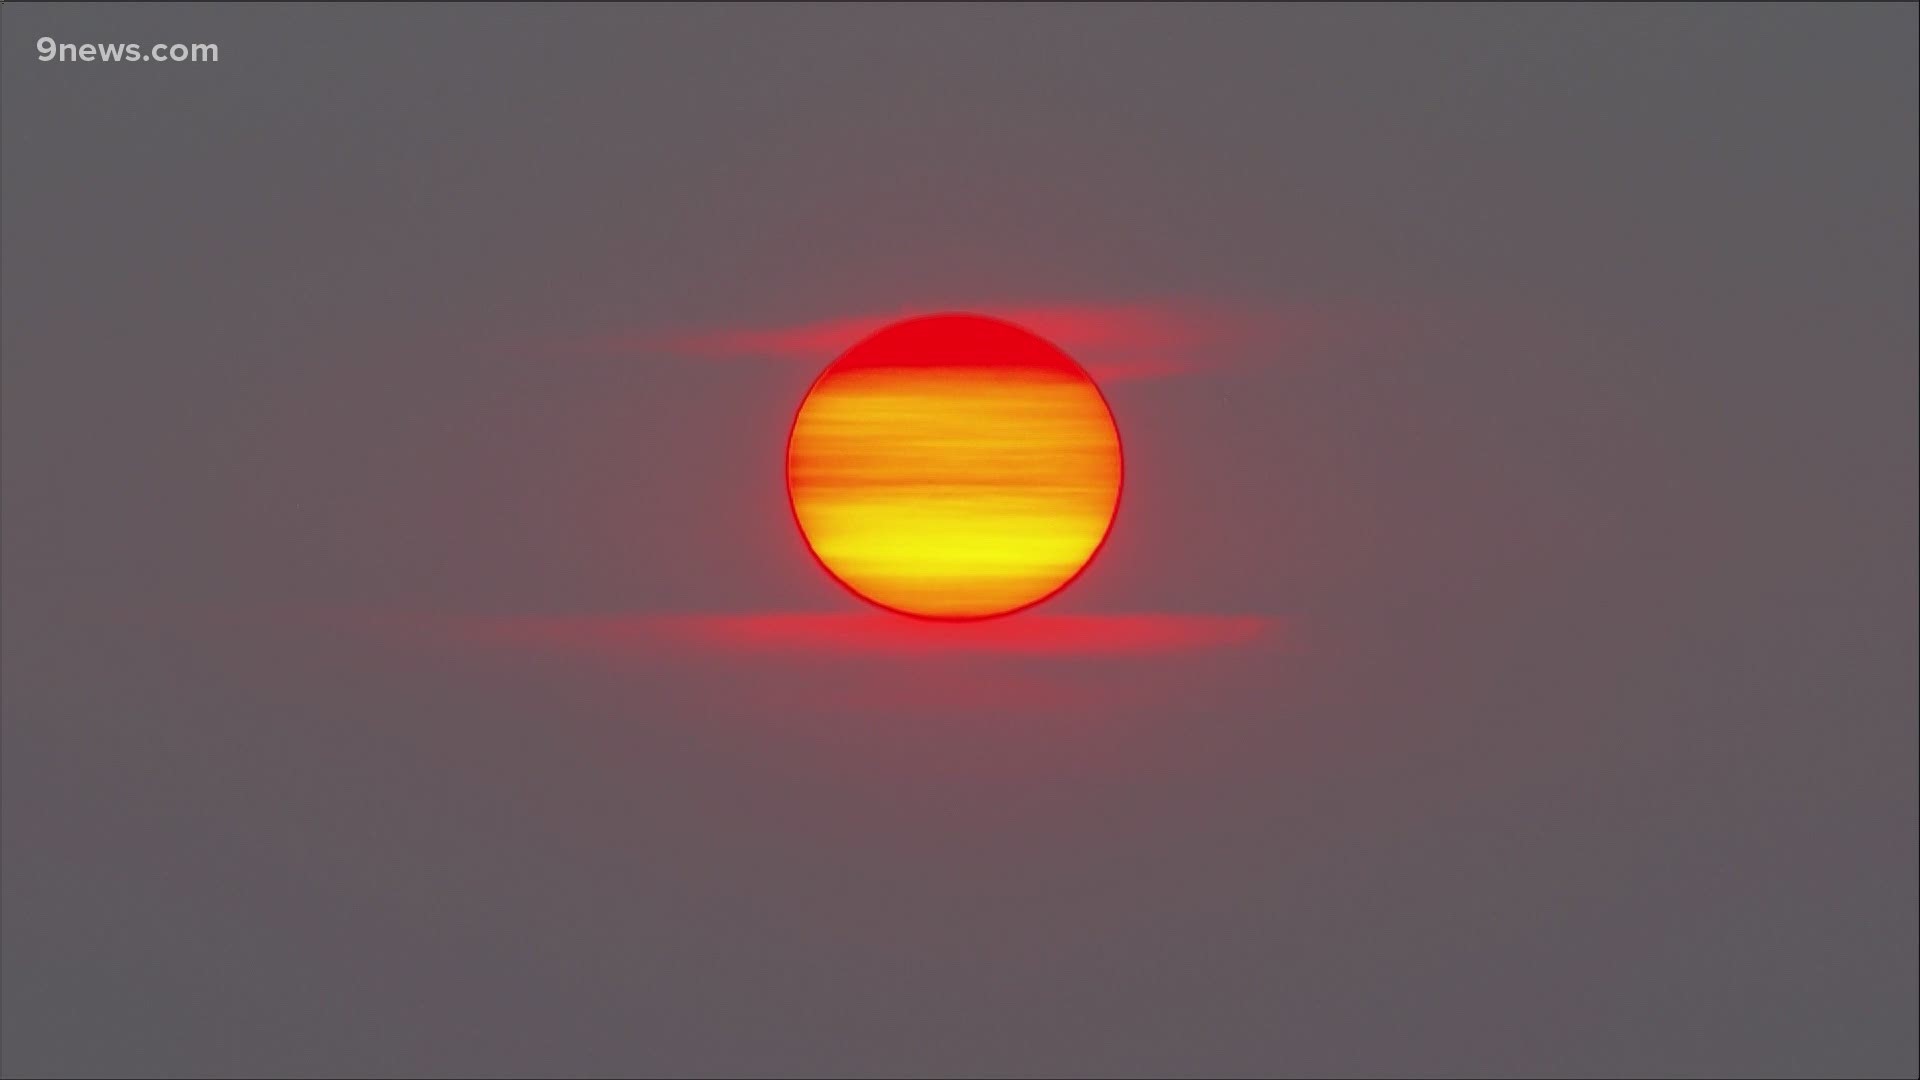 Check out the large, orange sunrise above Denver, Colorado on Tuesday, July 20, 2021.